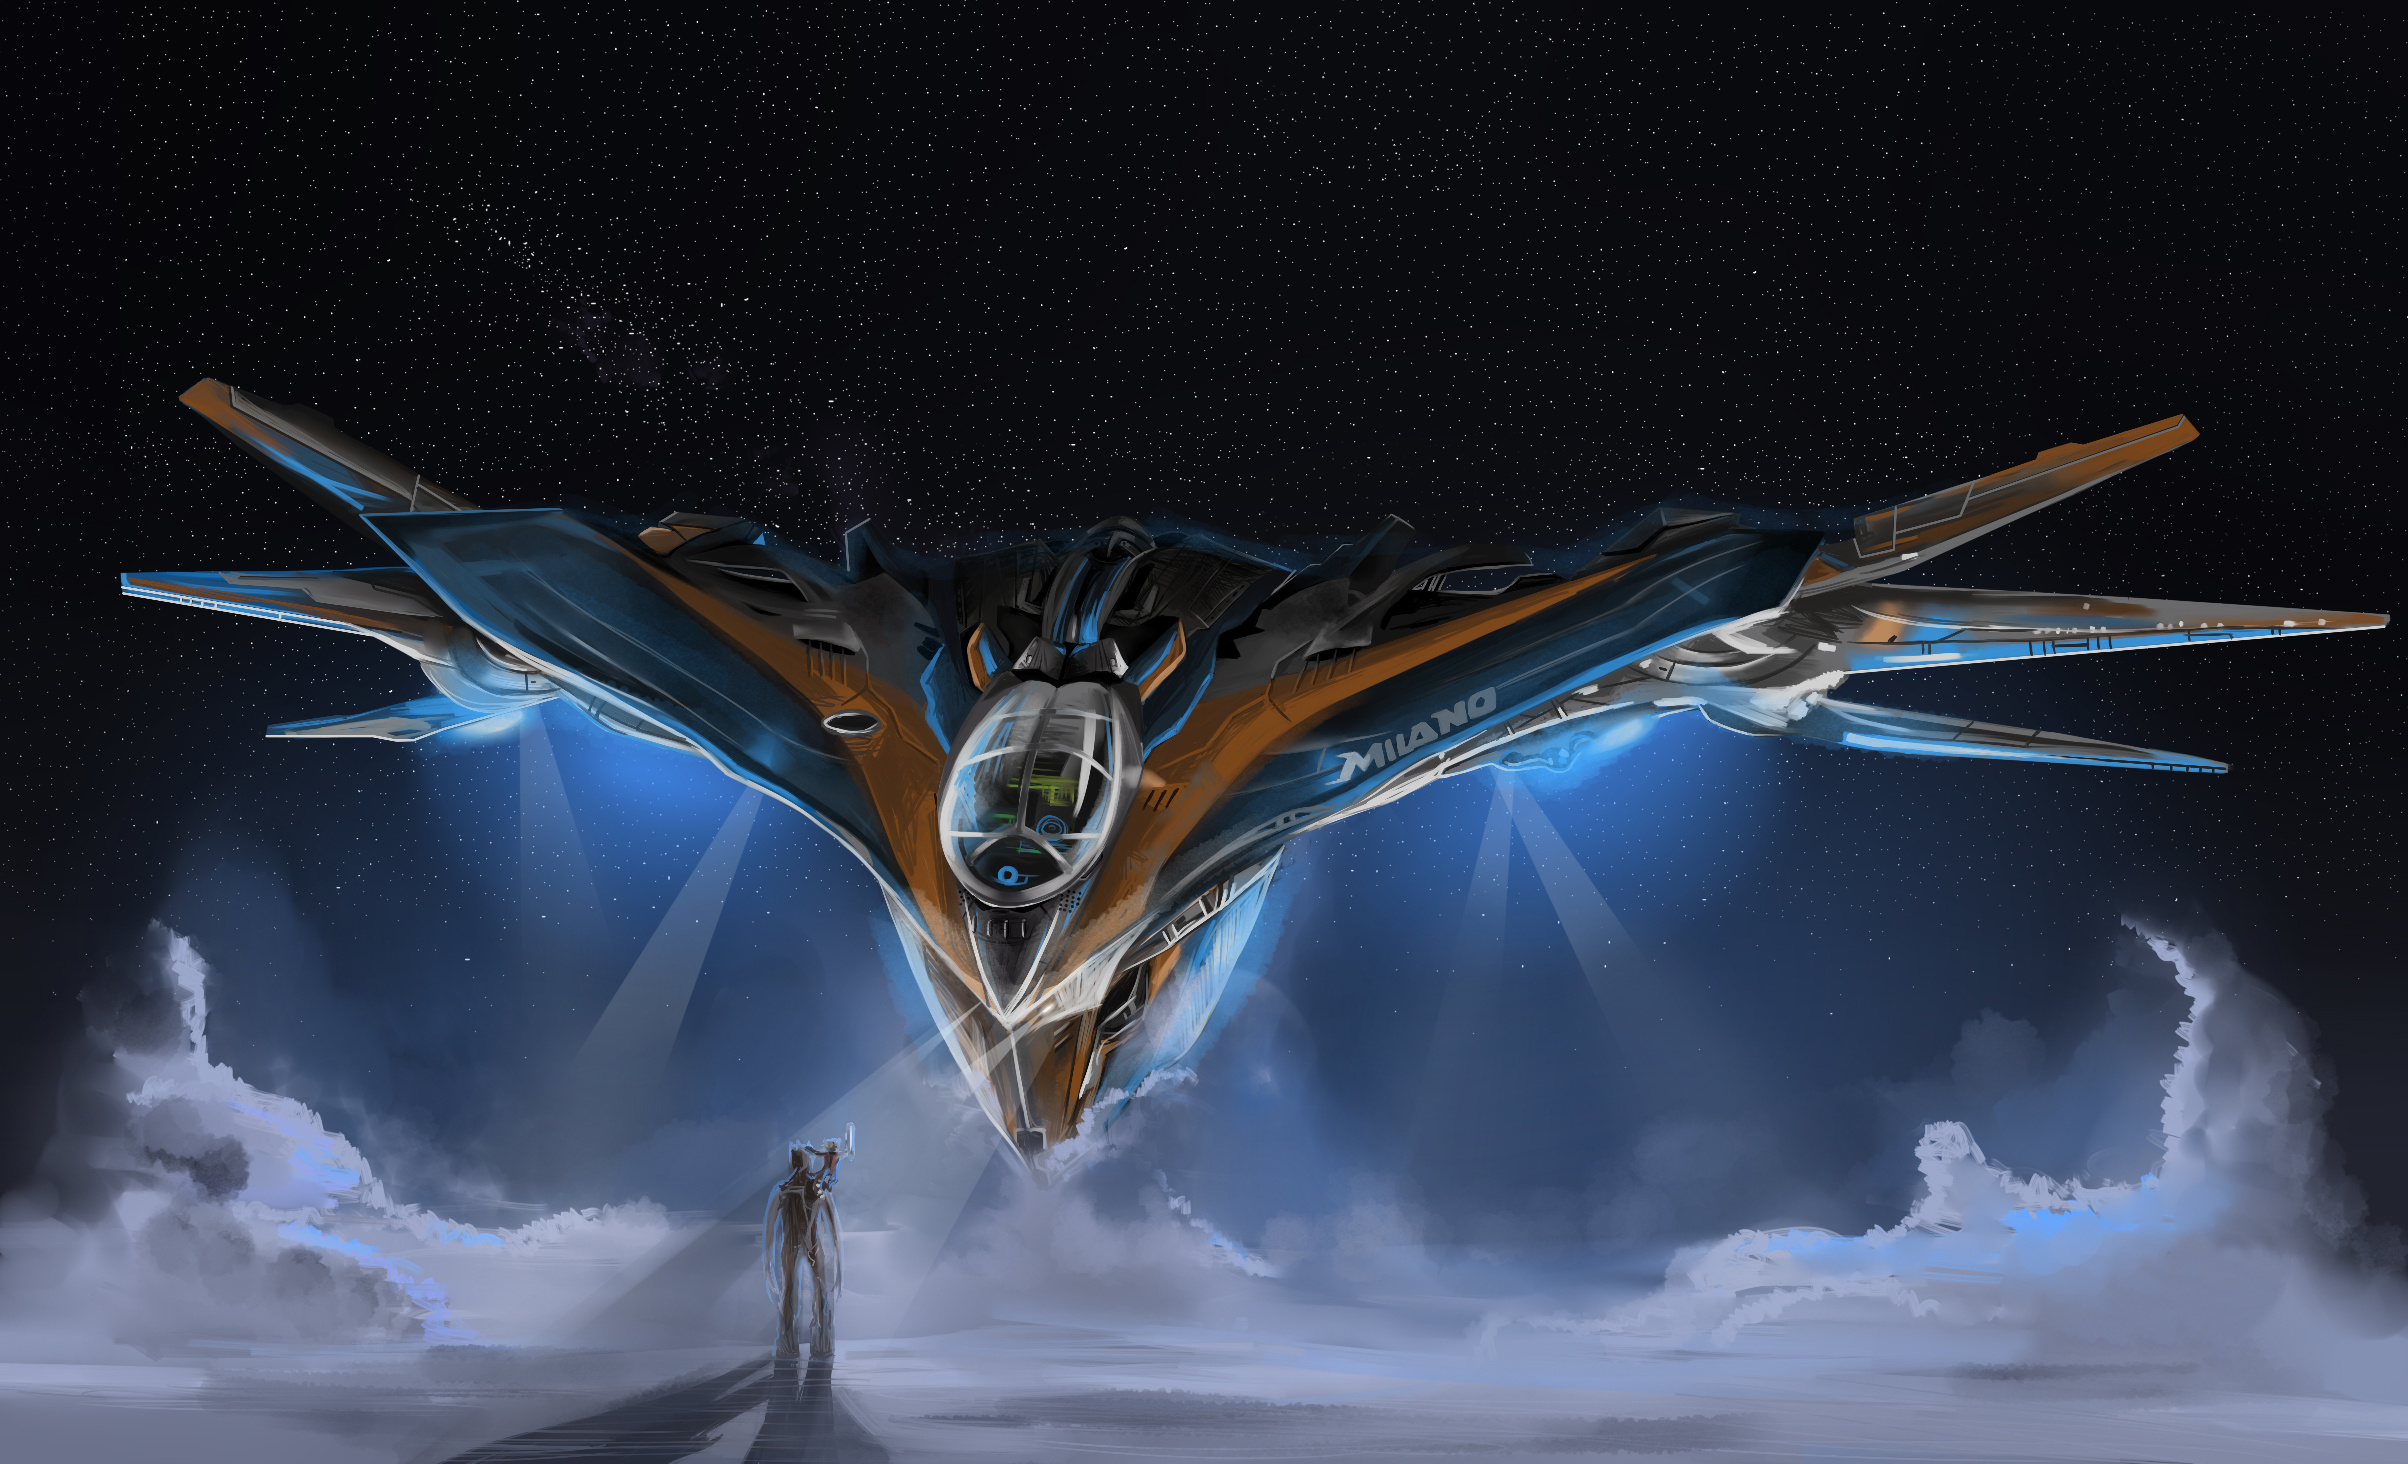 Spaceship From Guardians Of The Galaxy - HD Wallpaper 